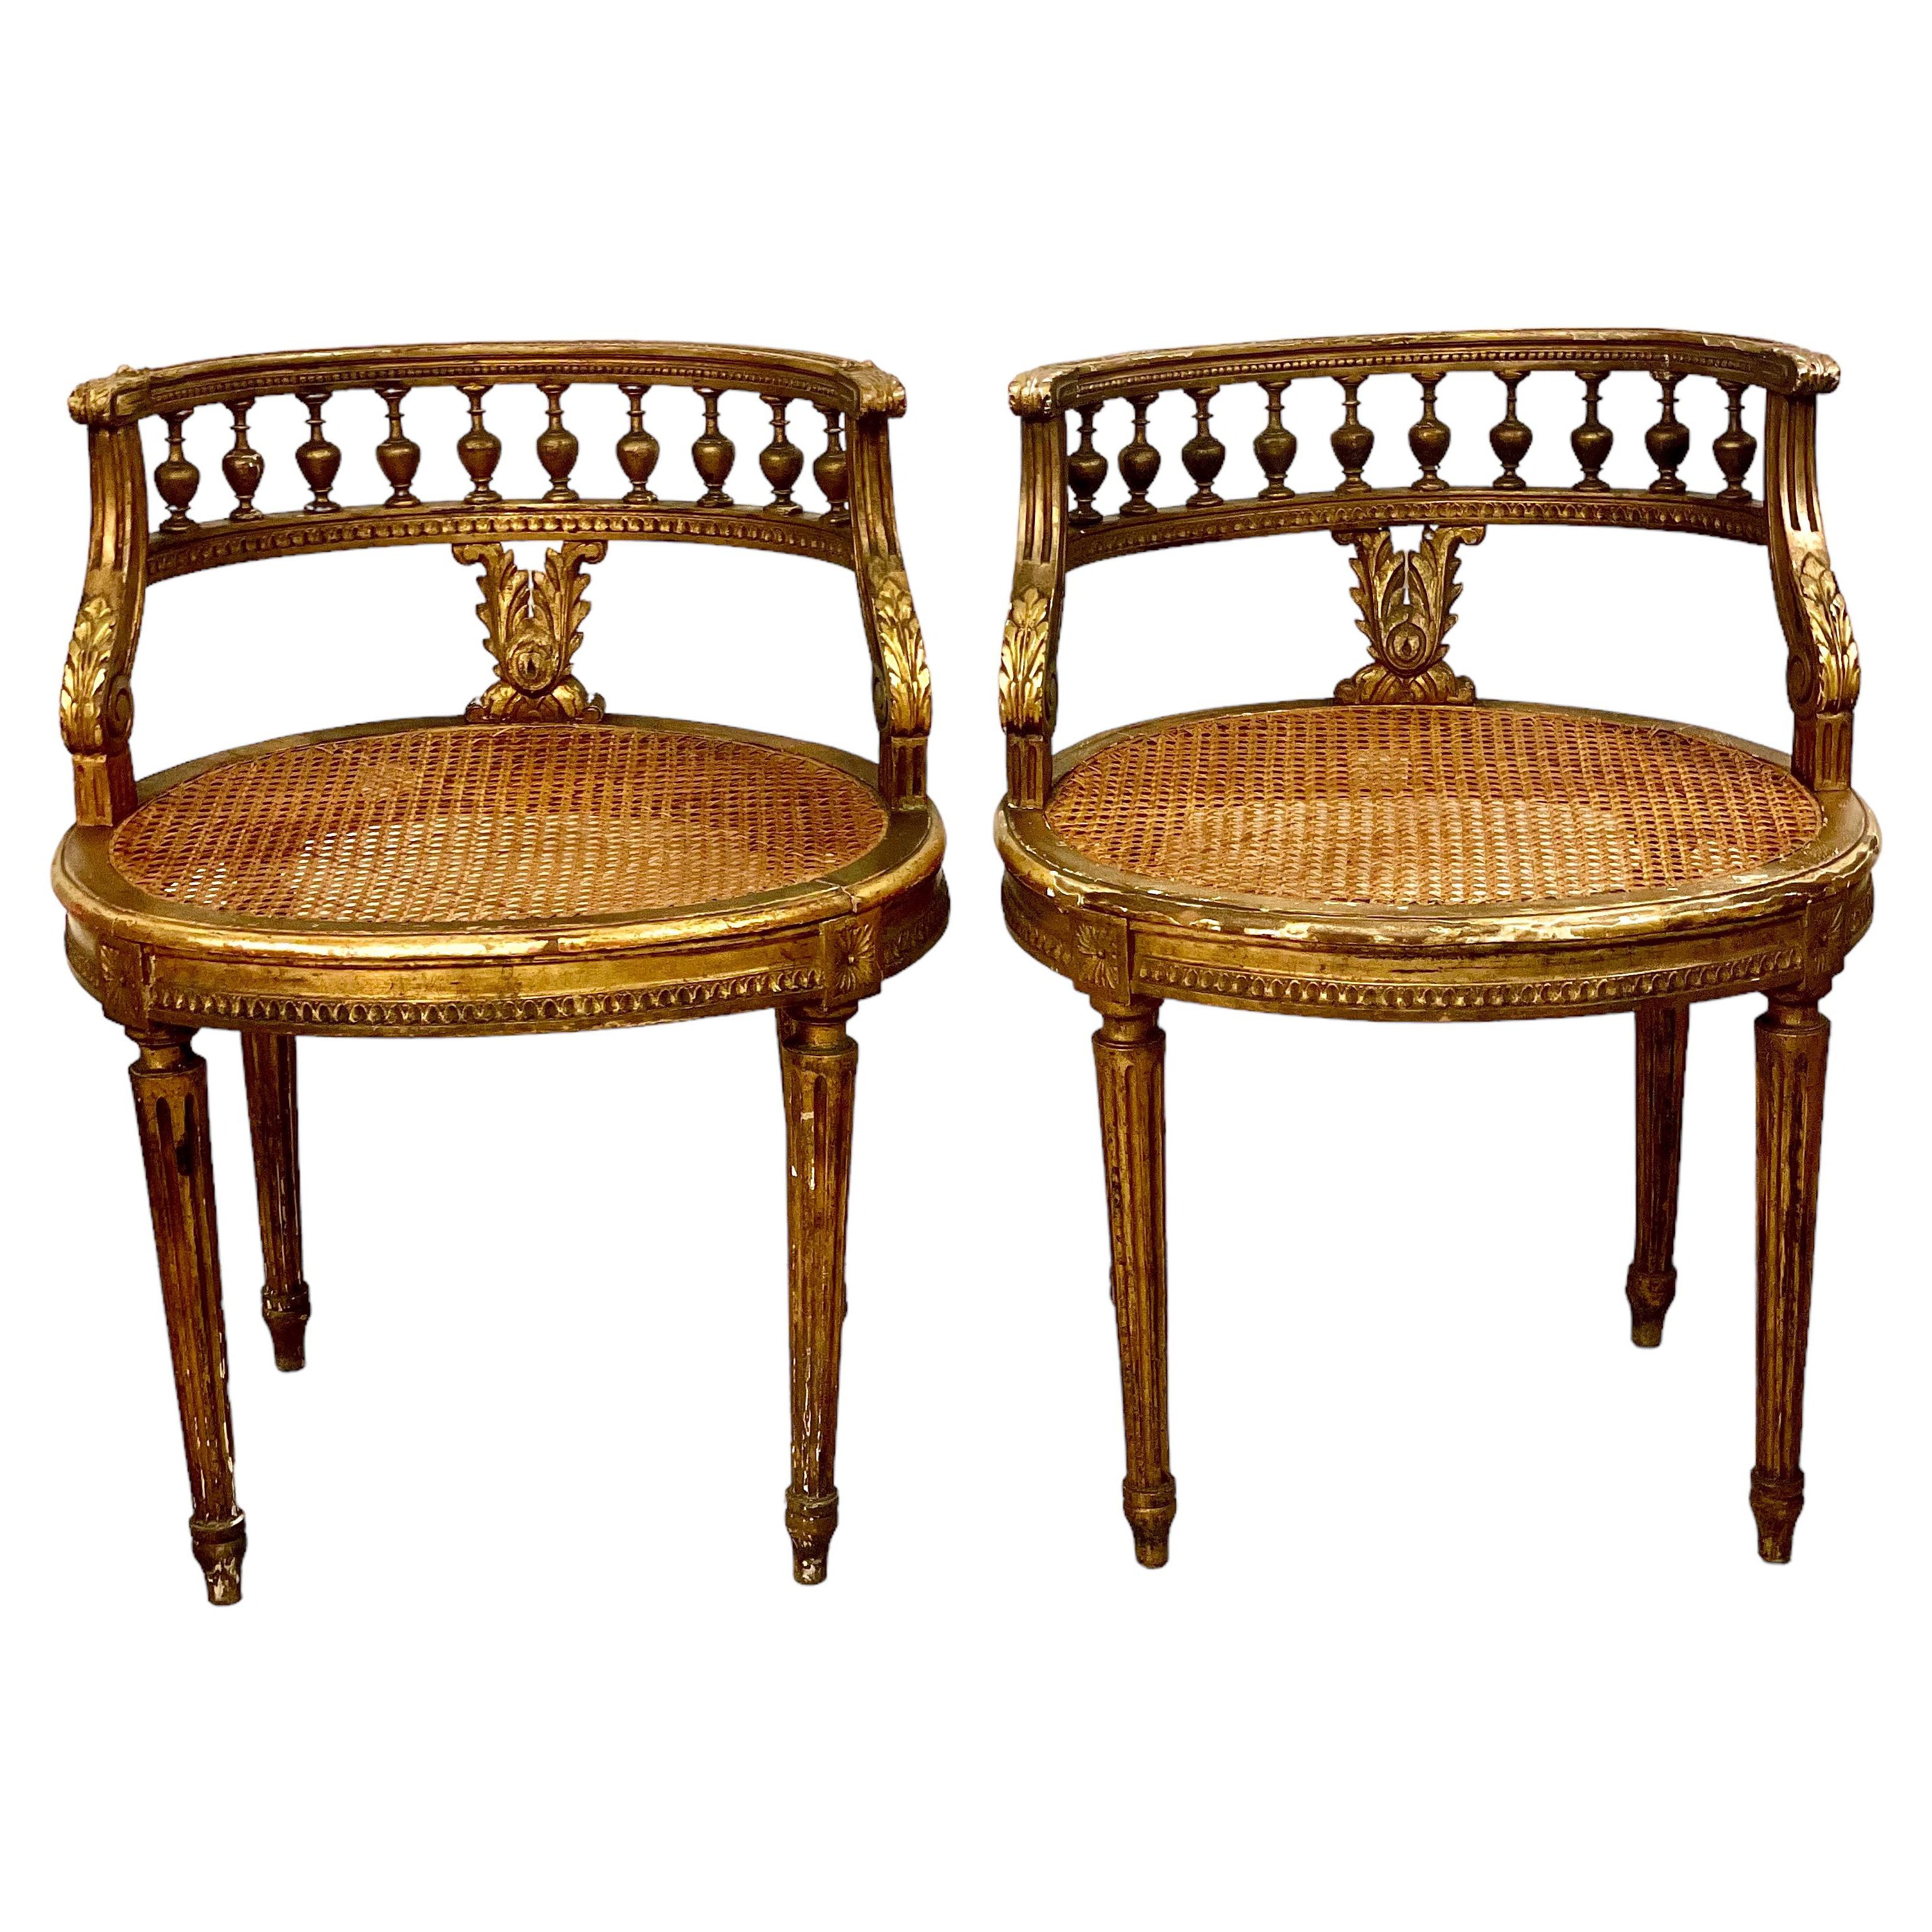 Pair of Antique French Louis XVI Gilt Caned Chairs  For Sale